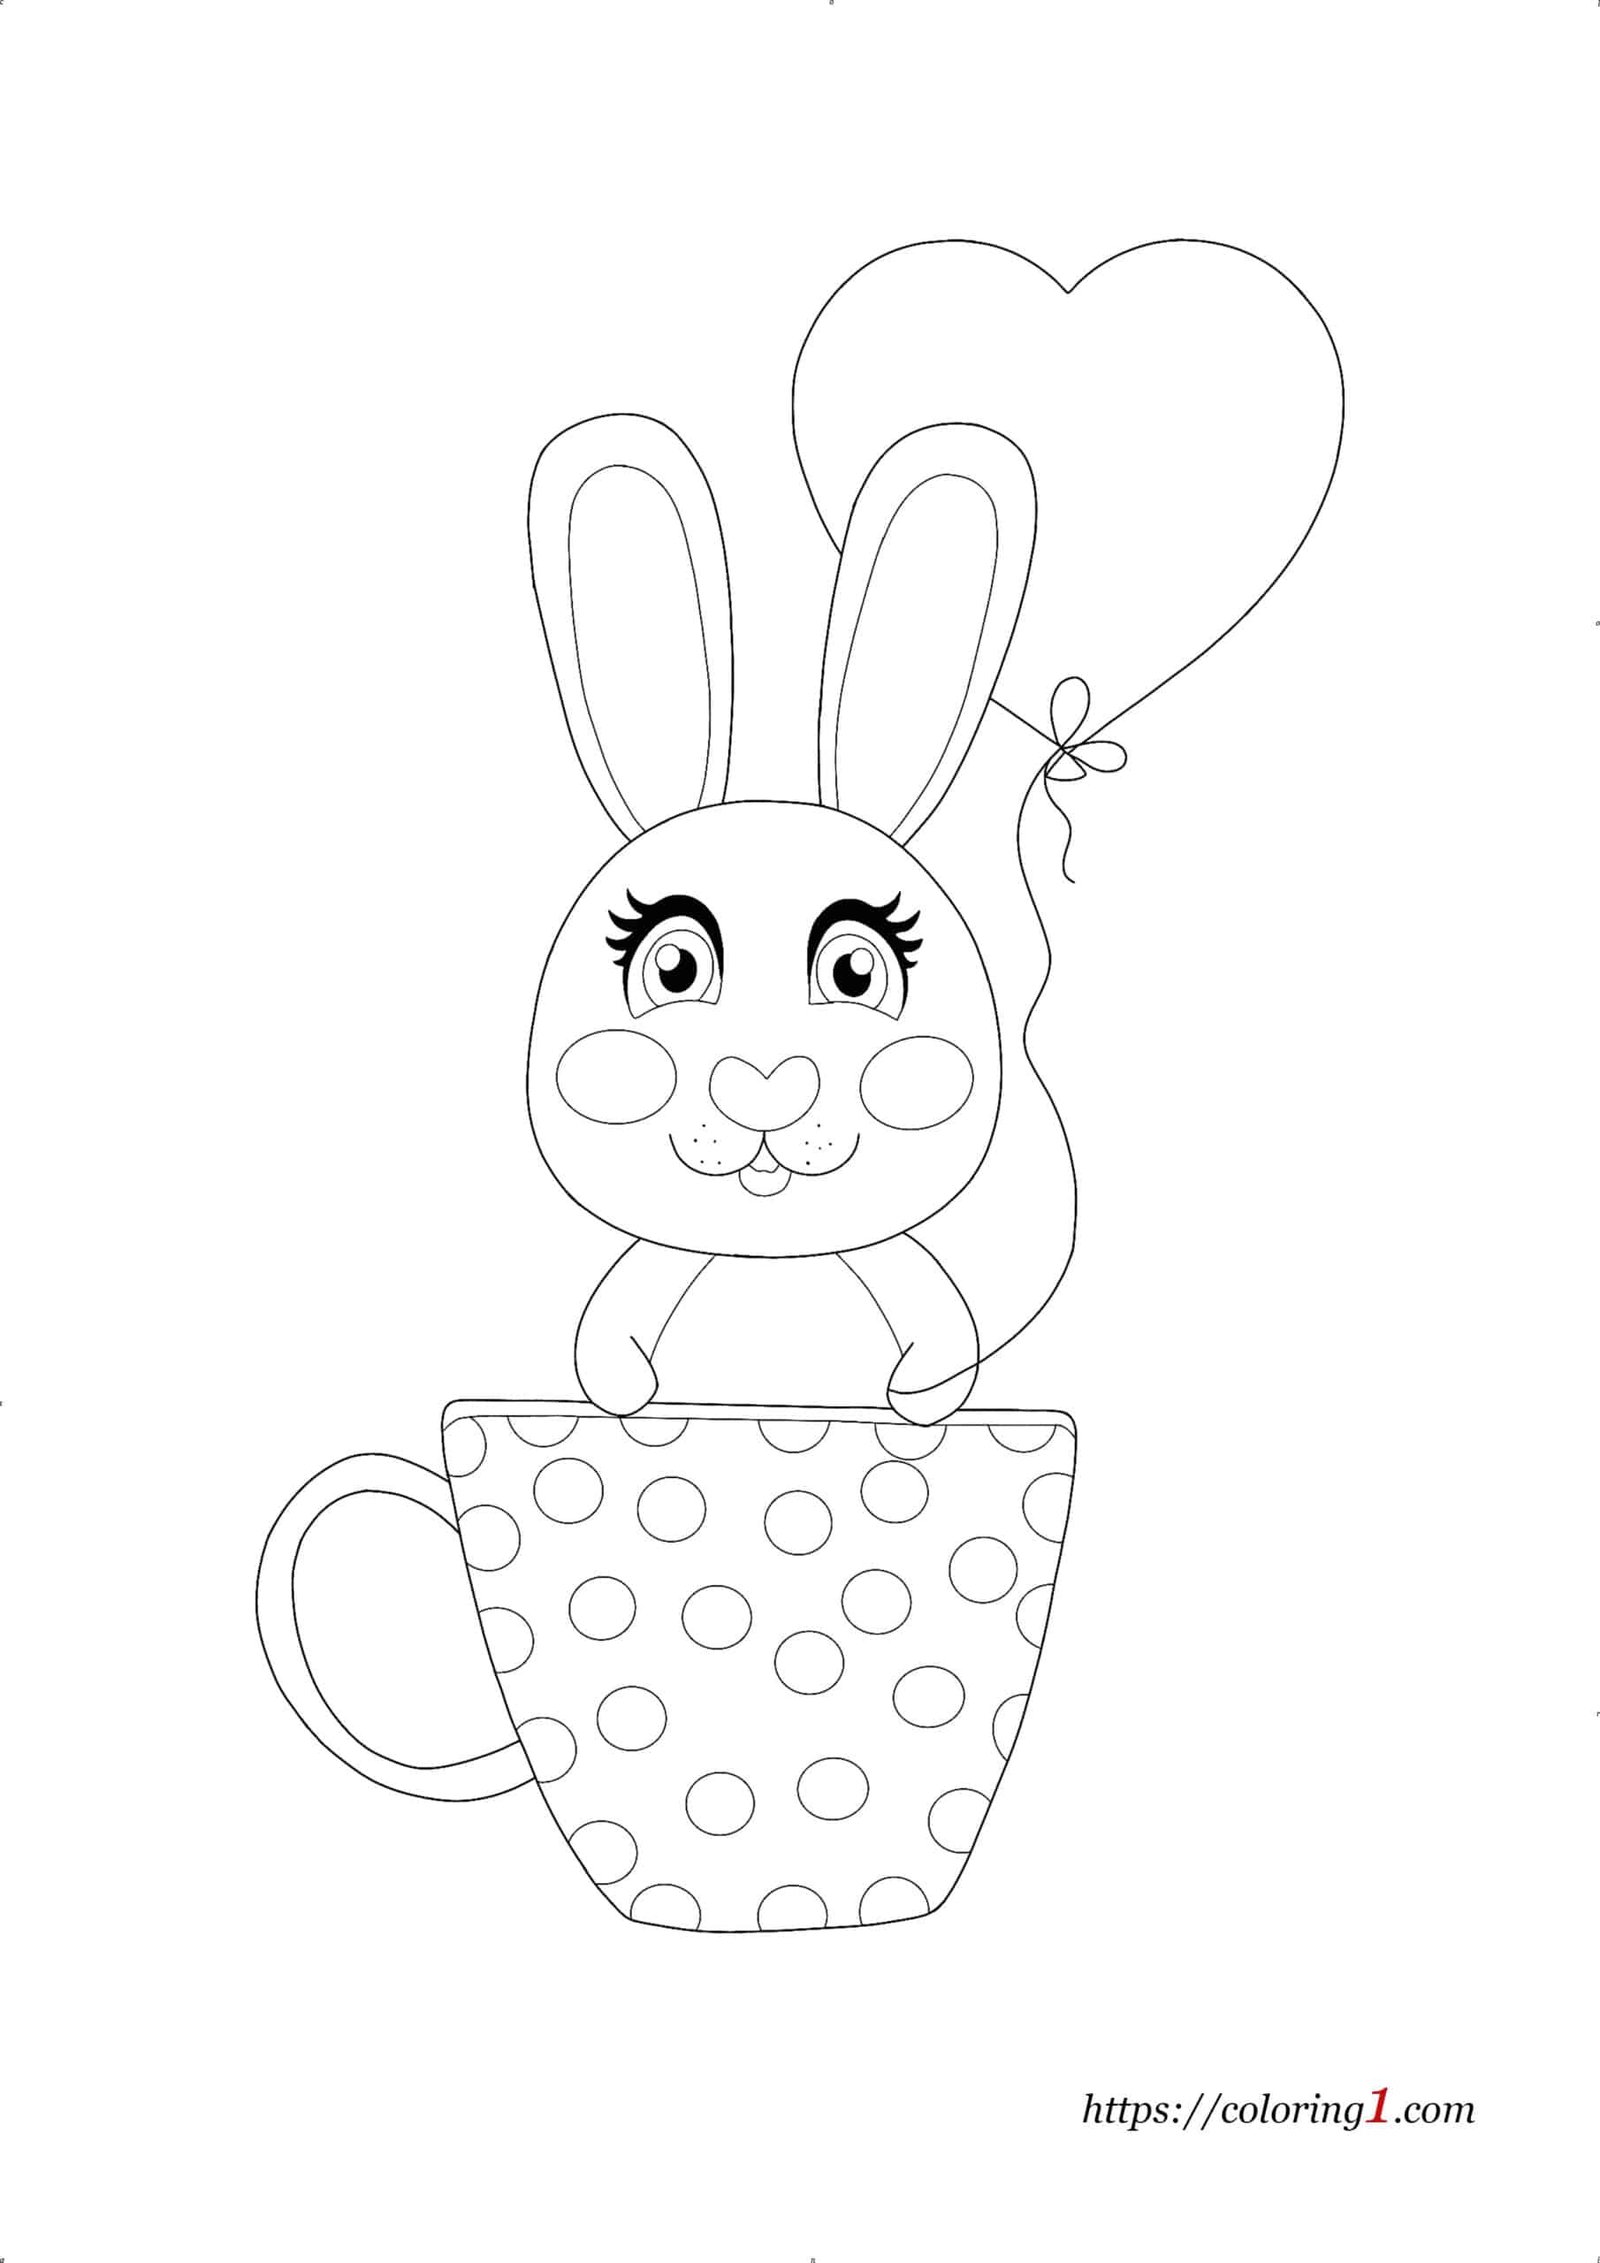 Cartoon Rabbit With Heart Balloon coloring page